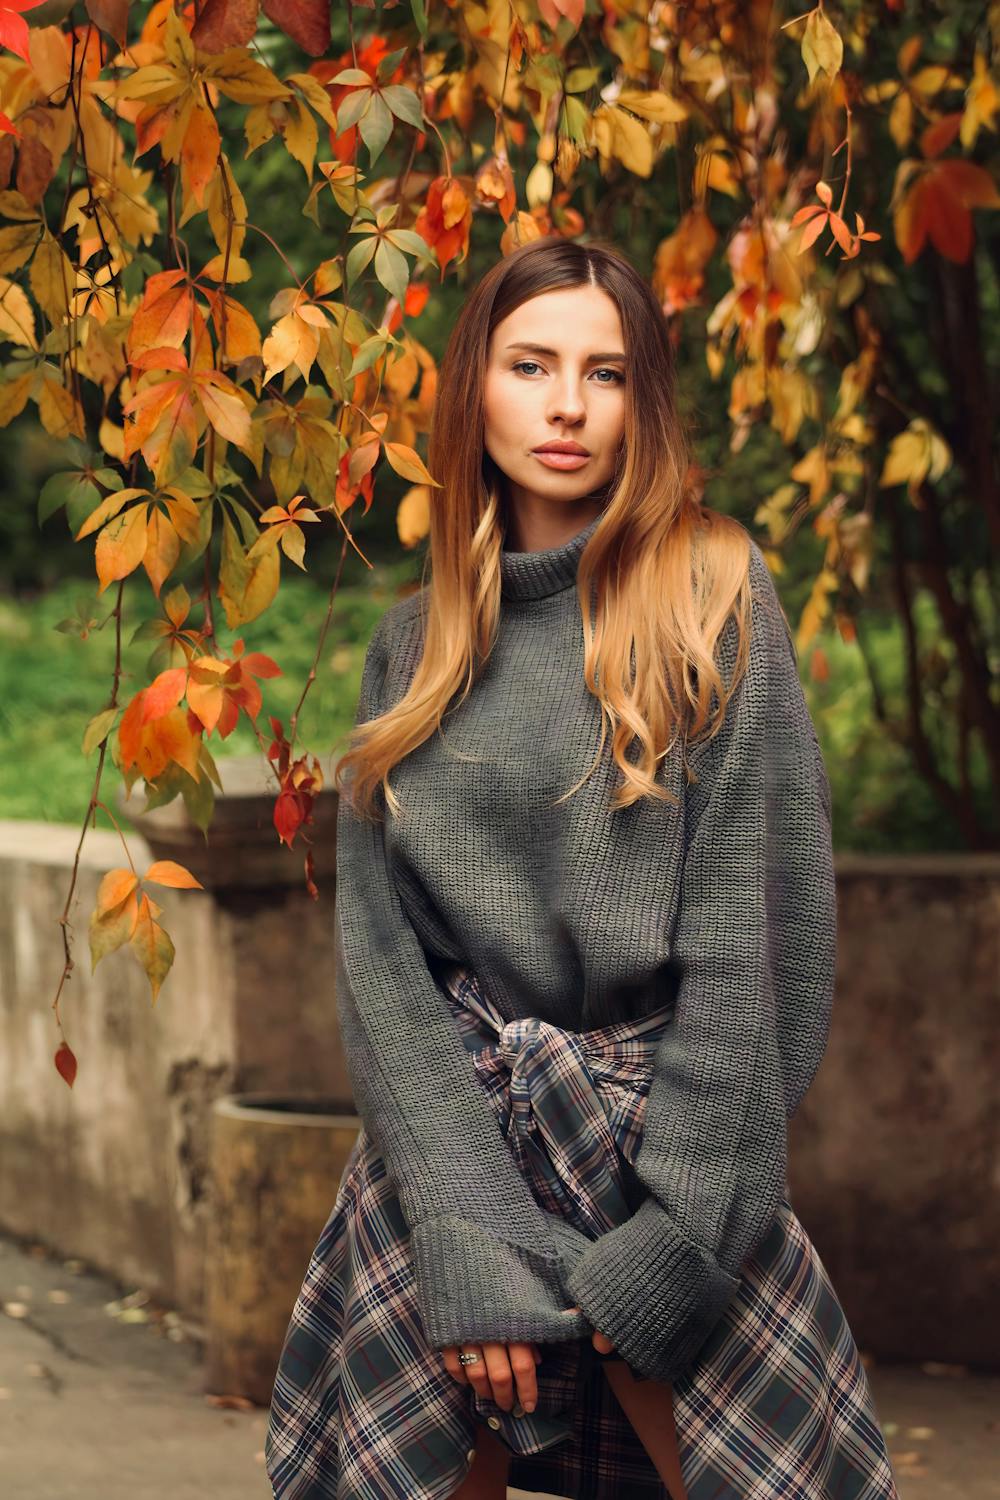 Woman with Brown Hair and in Sweater · Free Stock Photo